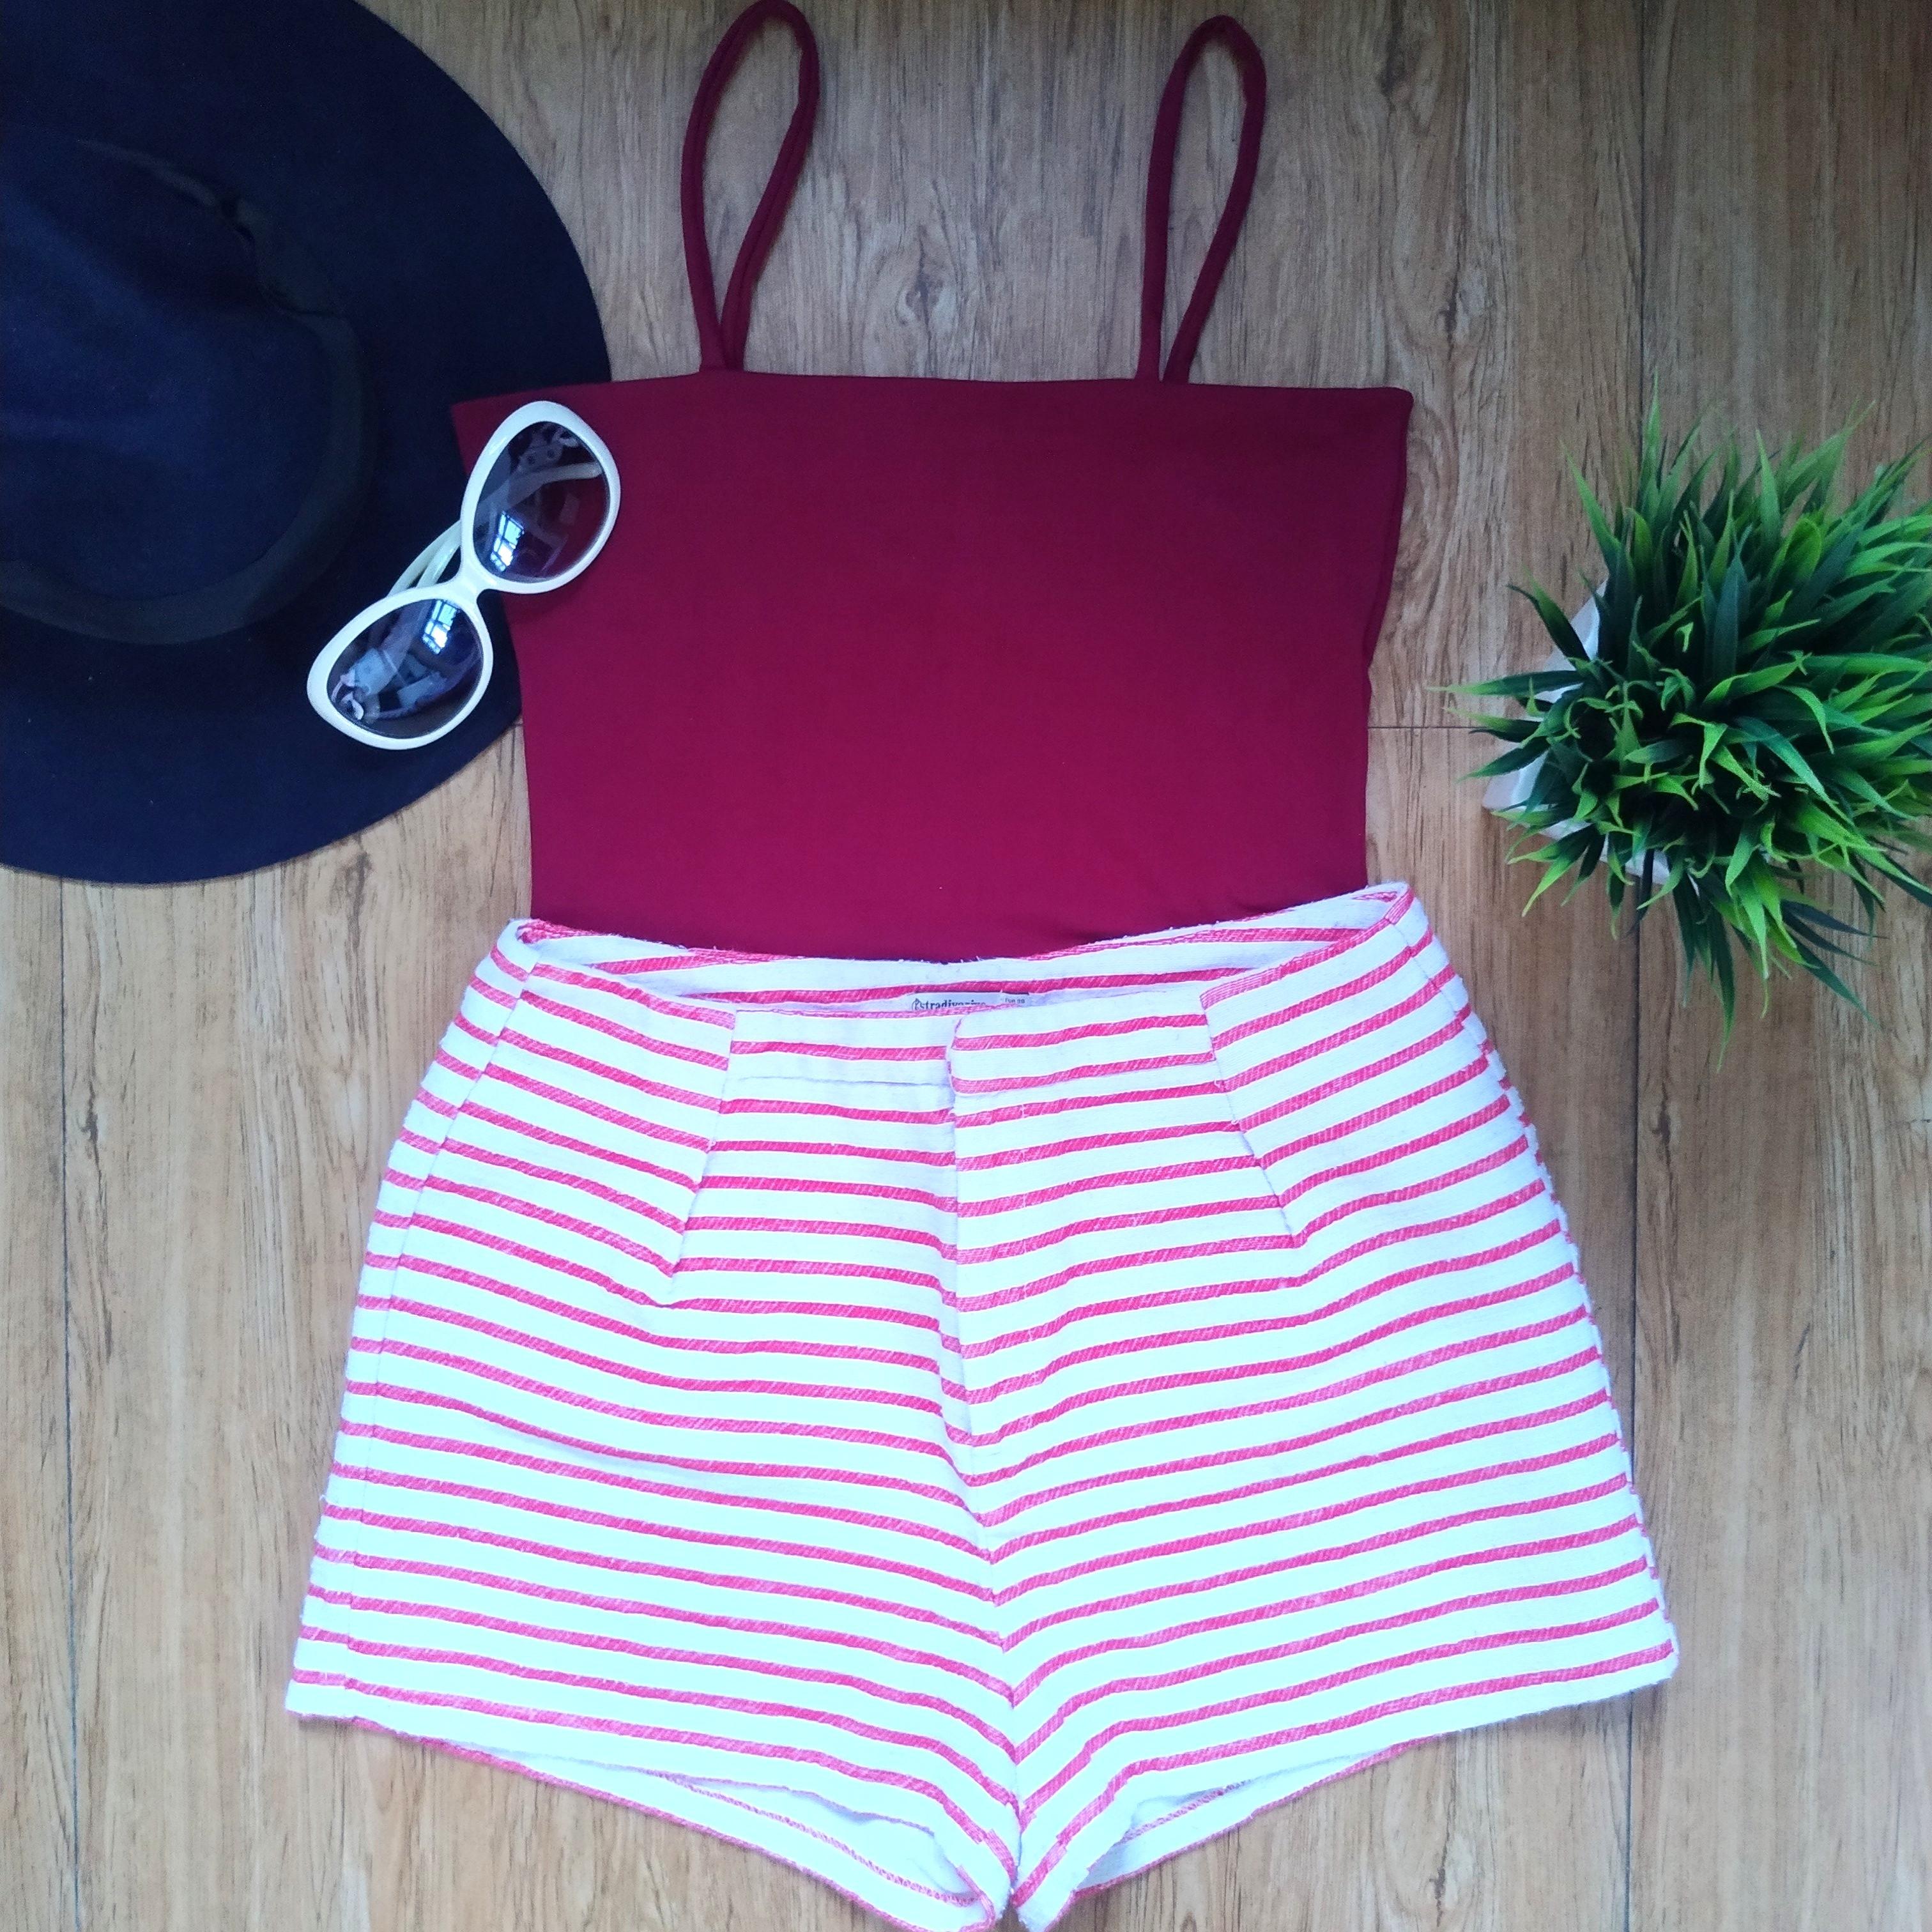 high waisted red and white striped shorts